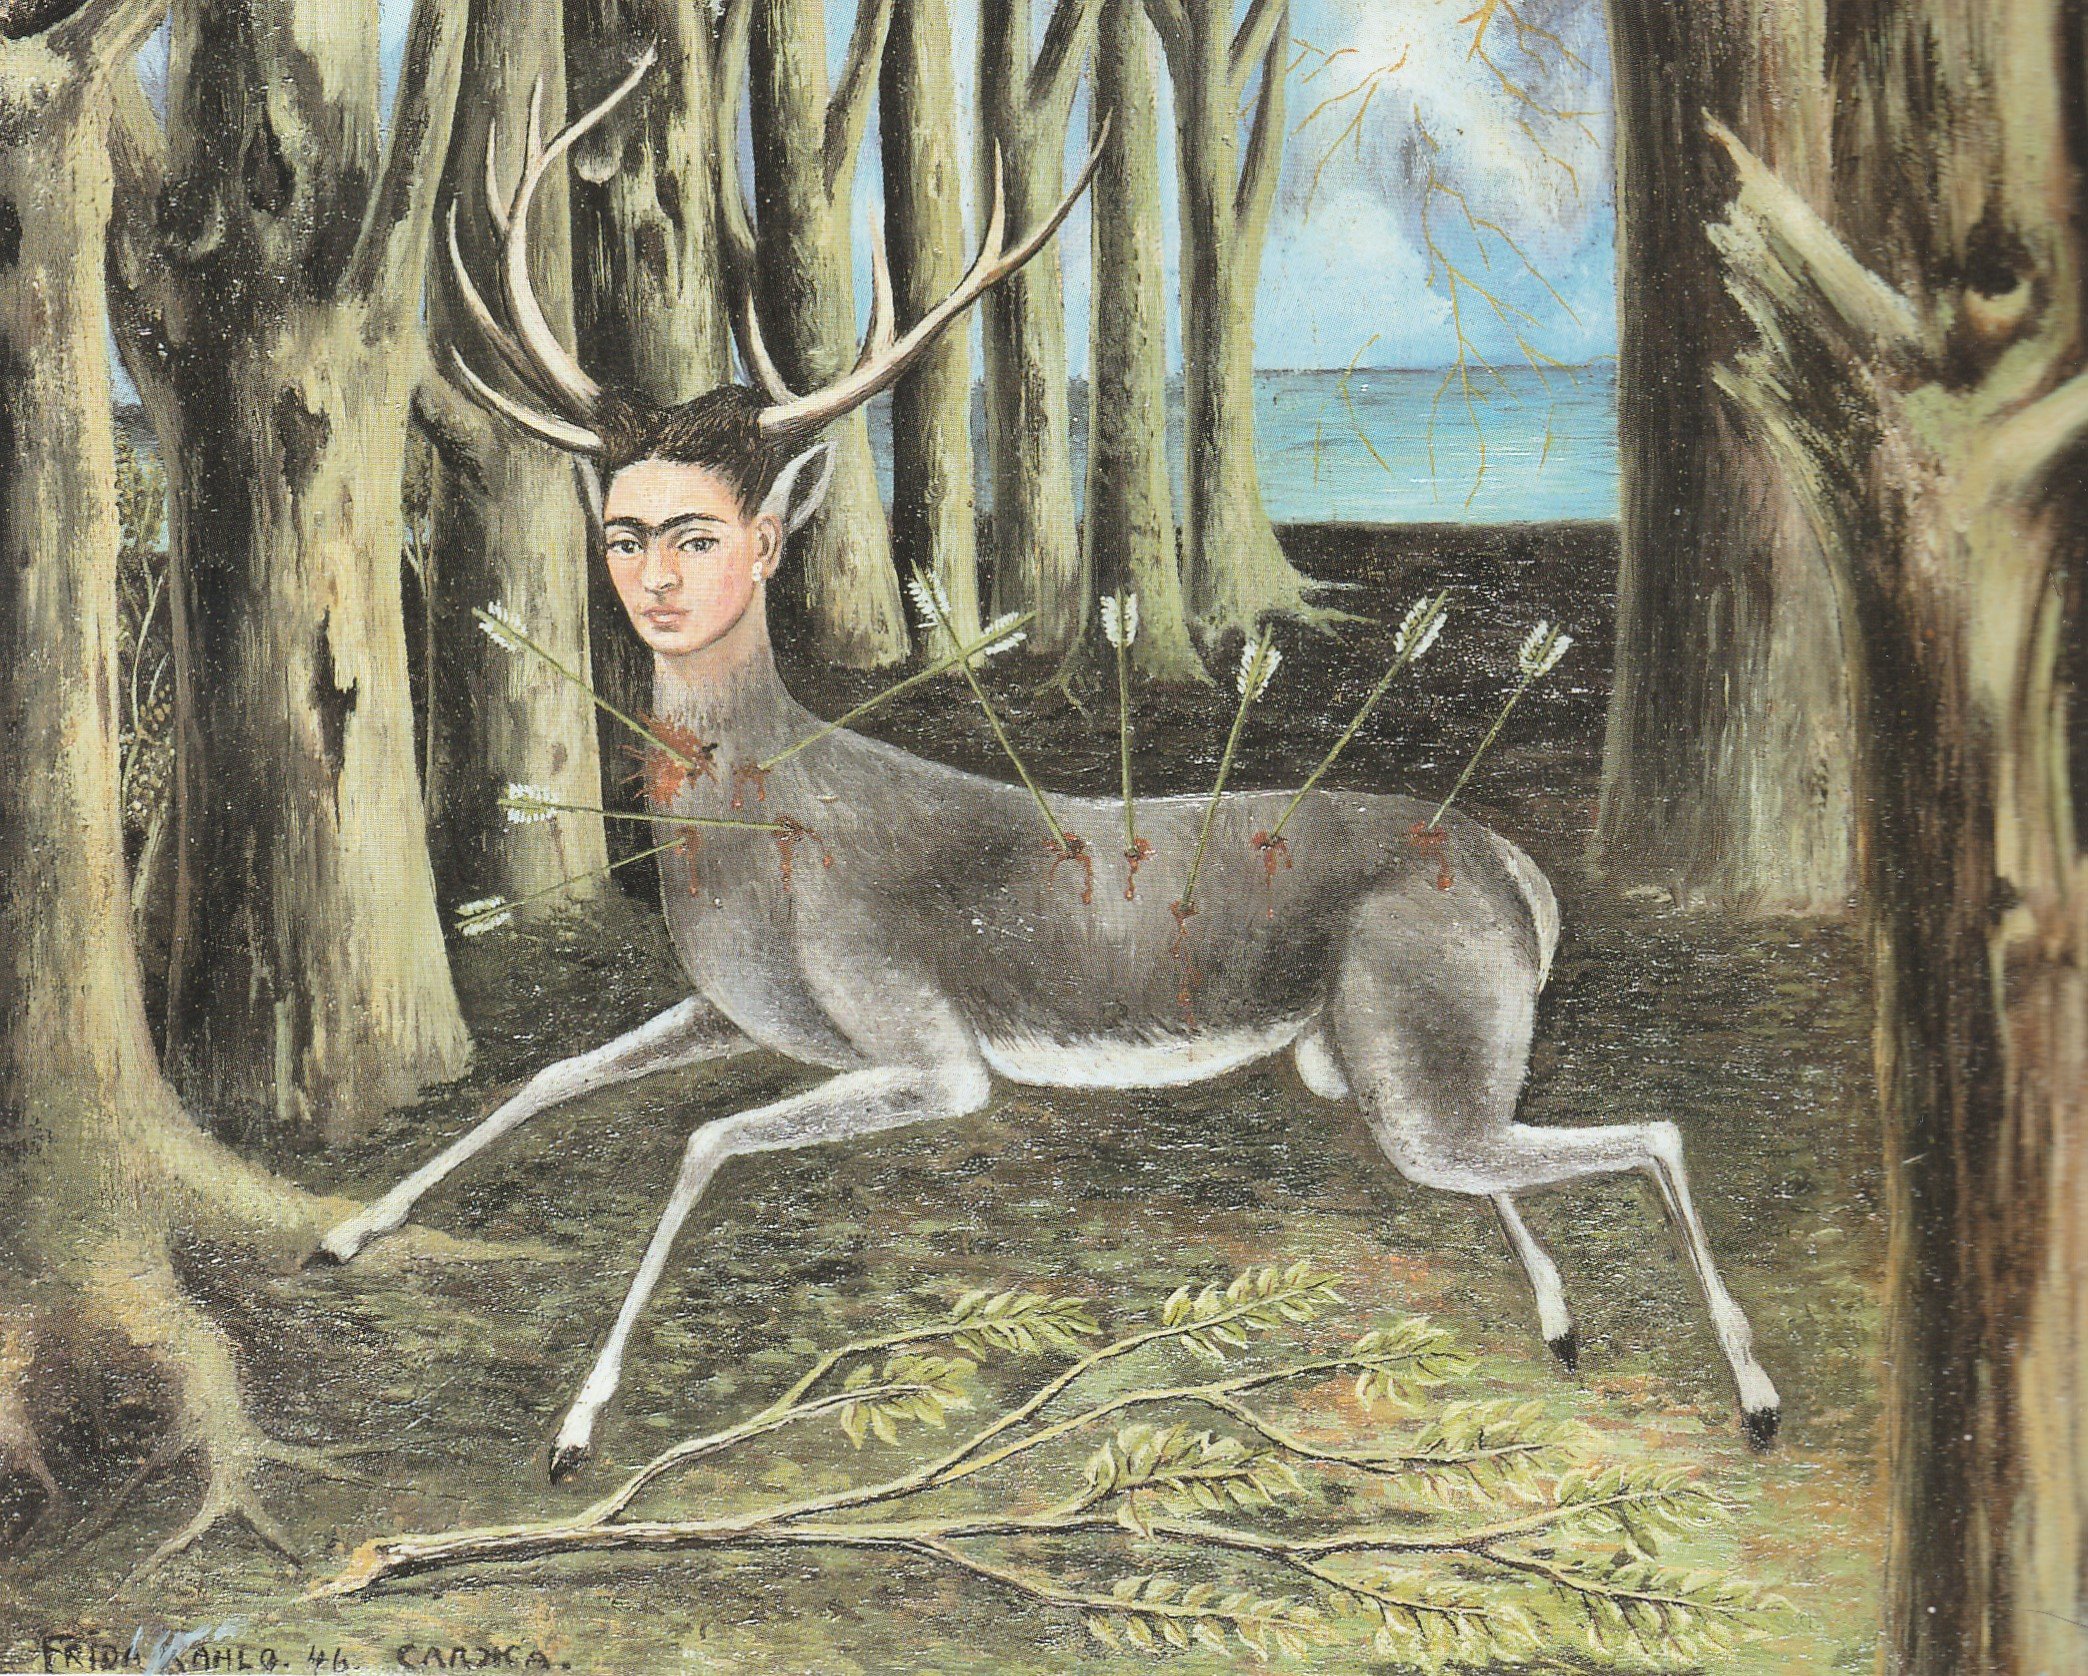 The Wounded Deer (The Little Deer) -1946